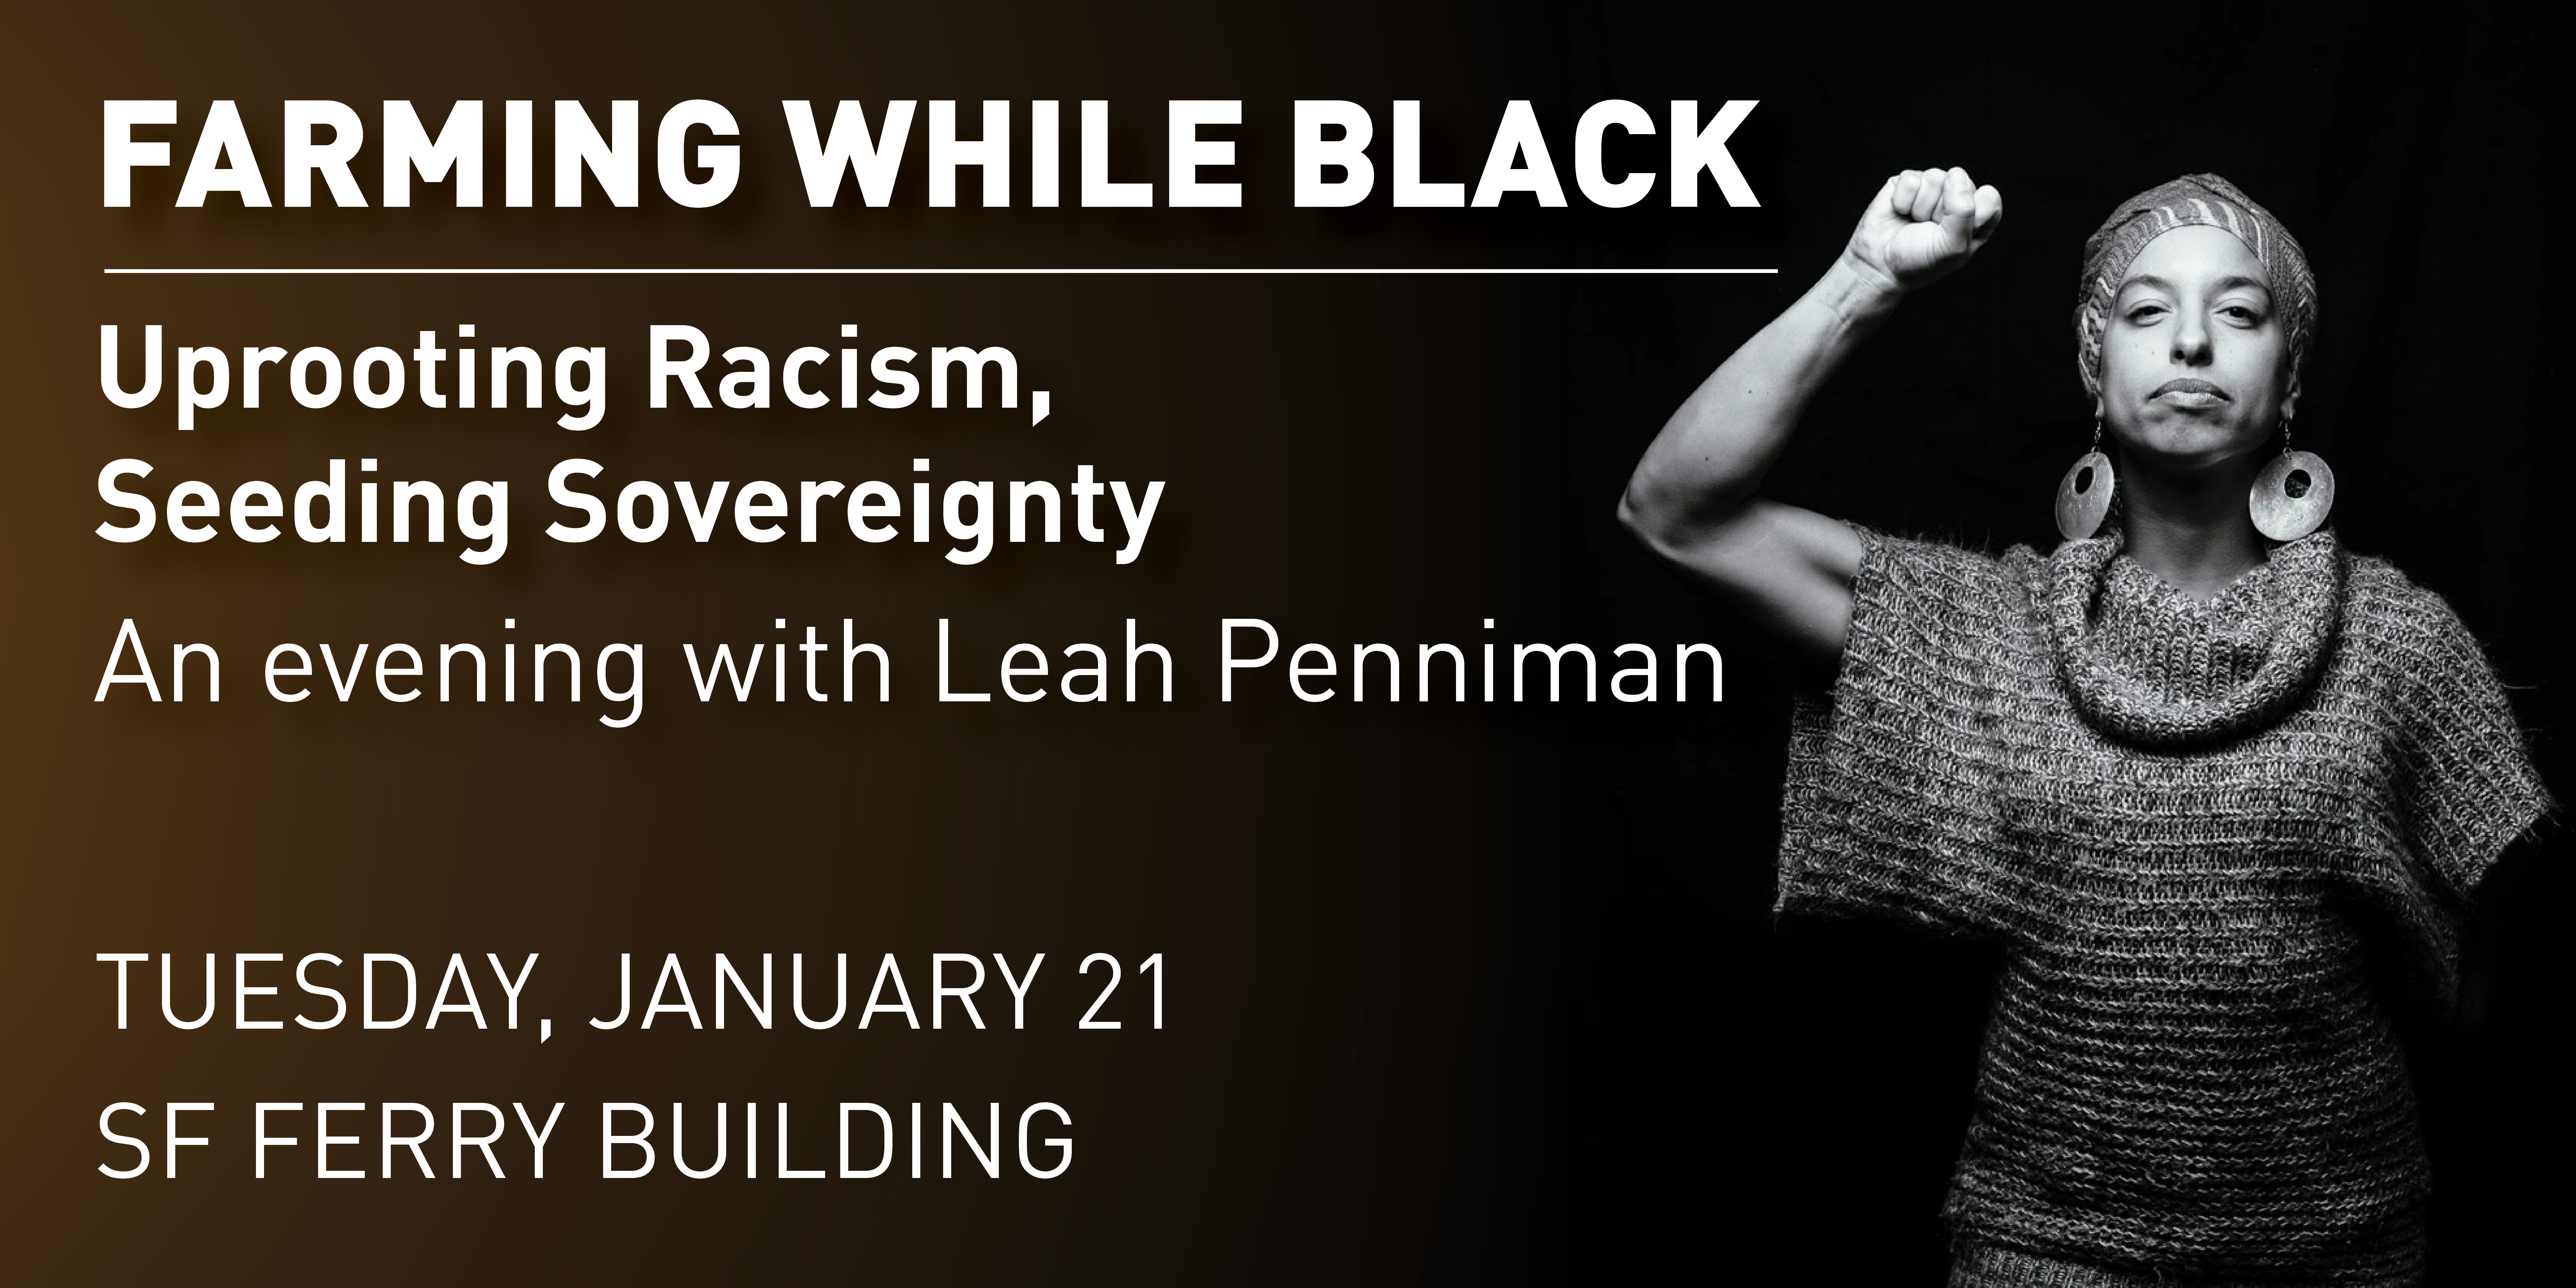 Farming While Black: An Evening with Leah Penniman